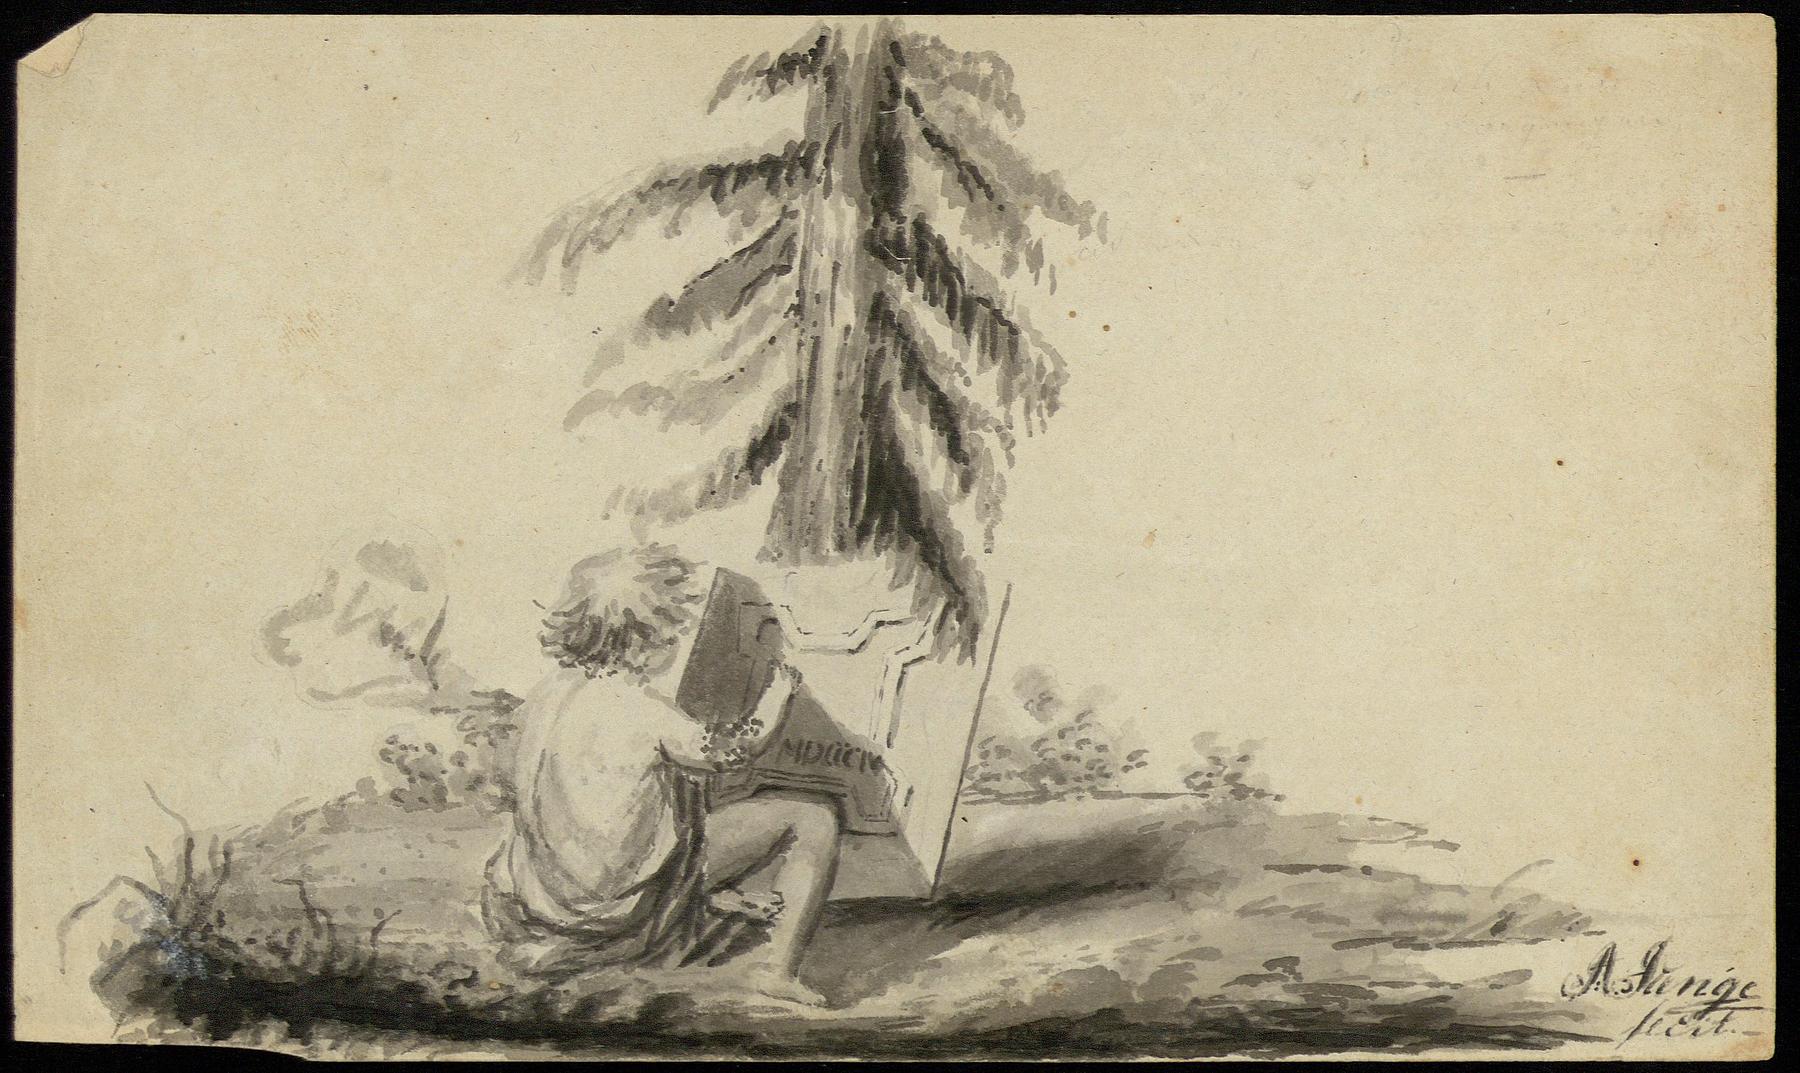 Boy drawing a ground plan in a nature setting (Architecture in nature), N261,13